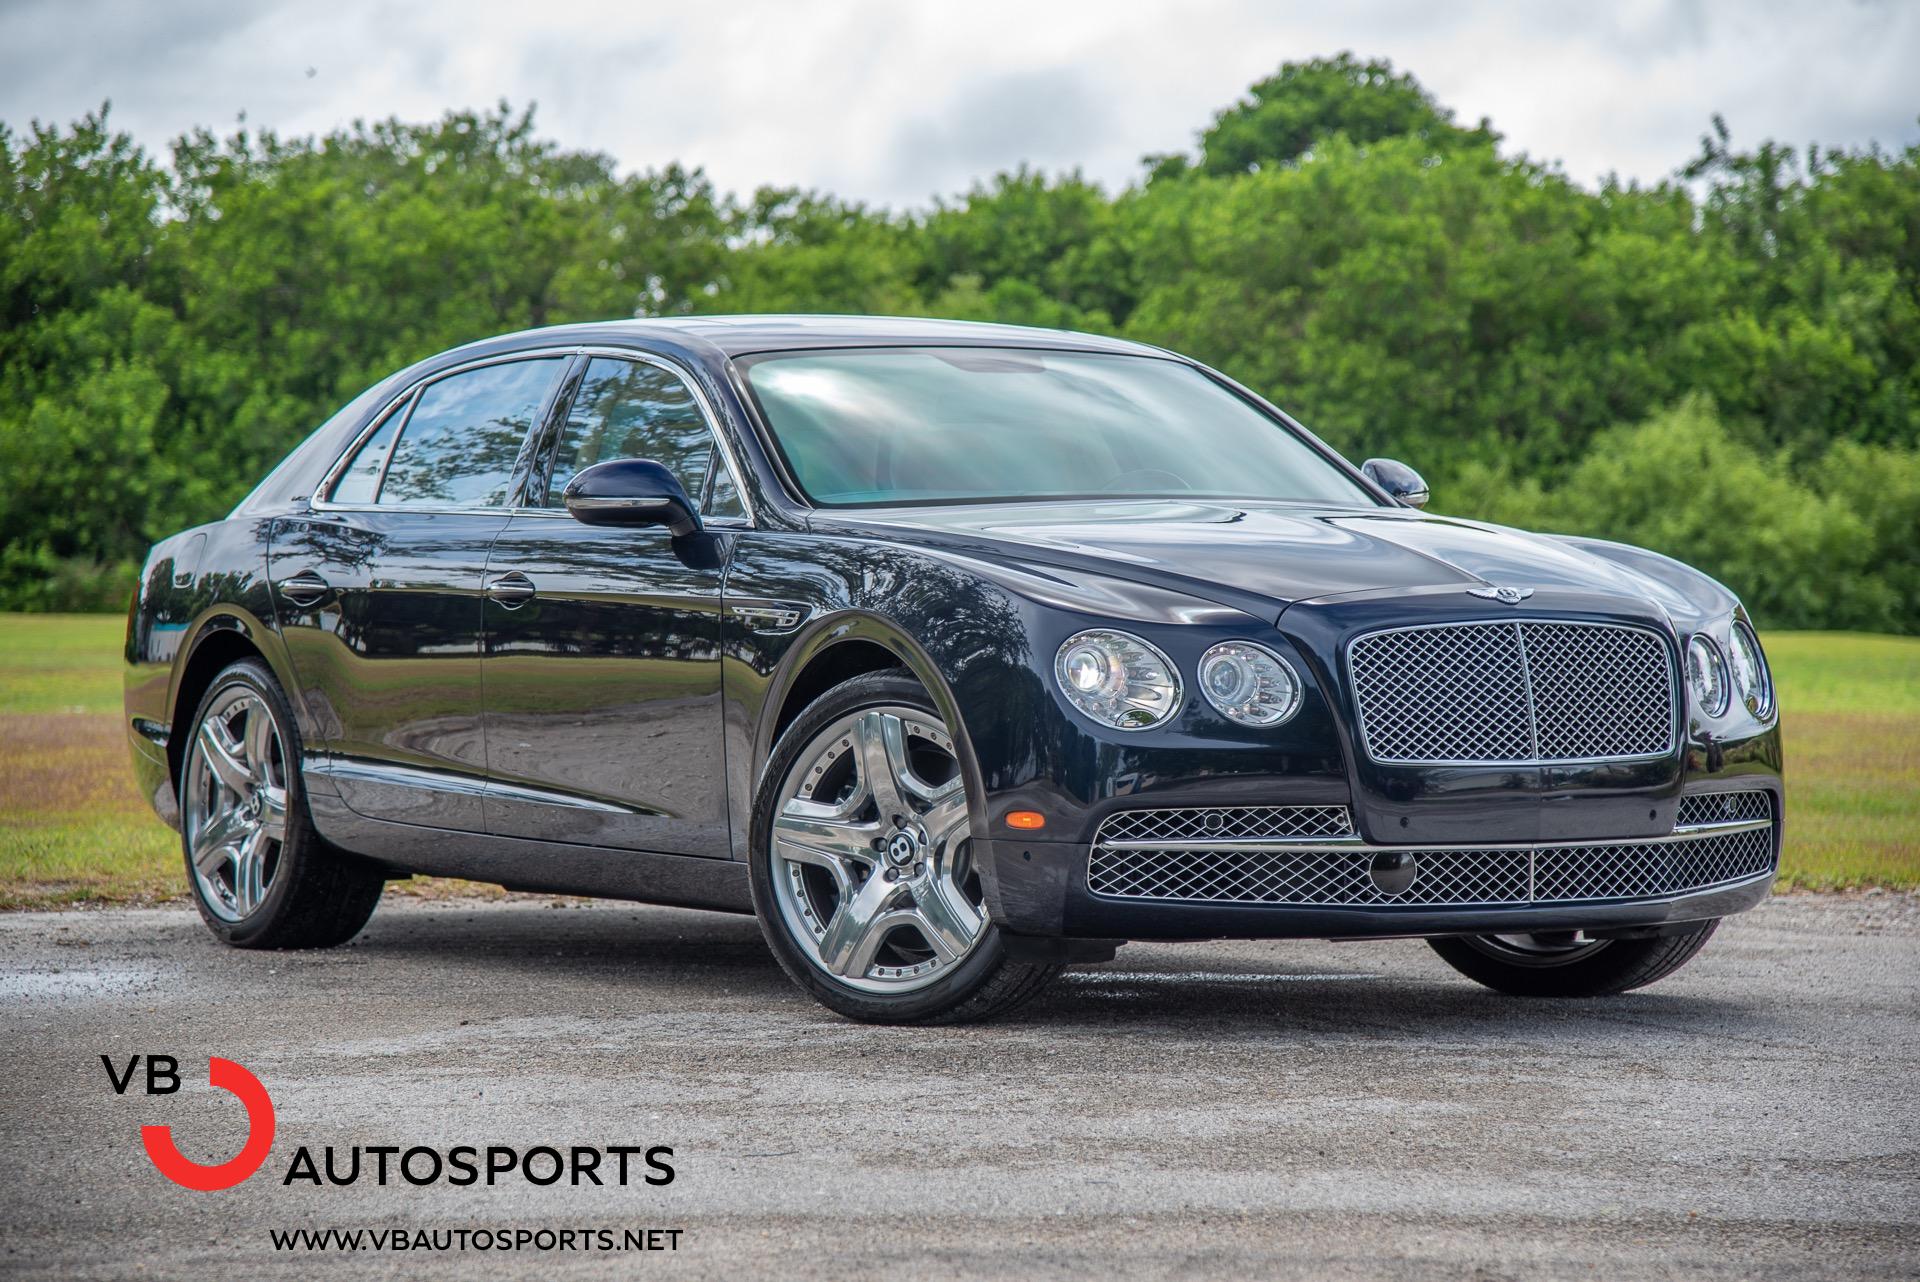 Used 14 Bentley Flying Spur W12 For Sale 900 Vb Autosports Stock Vbc044